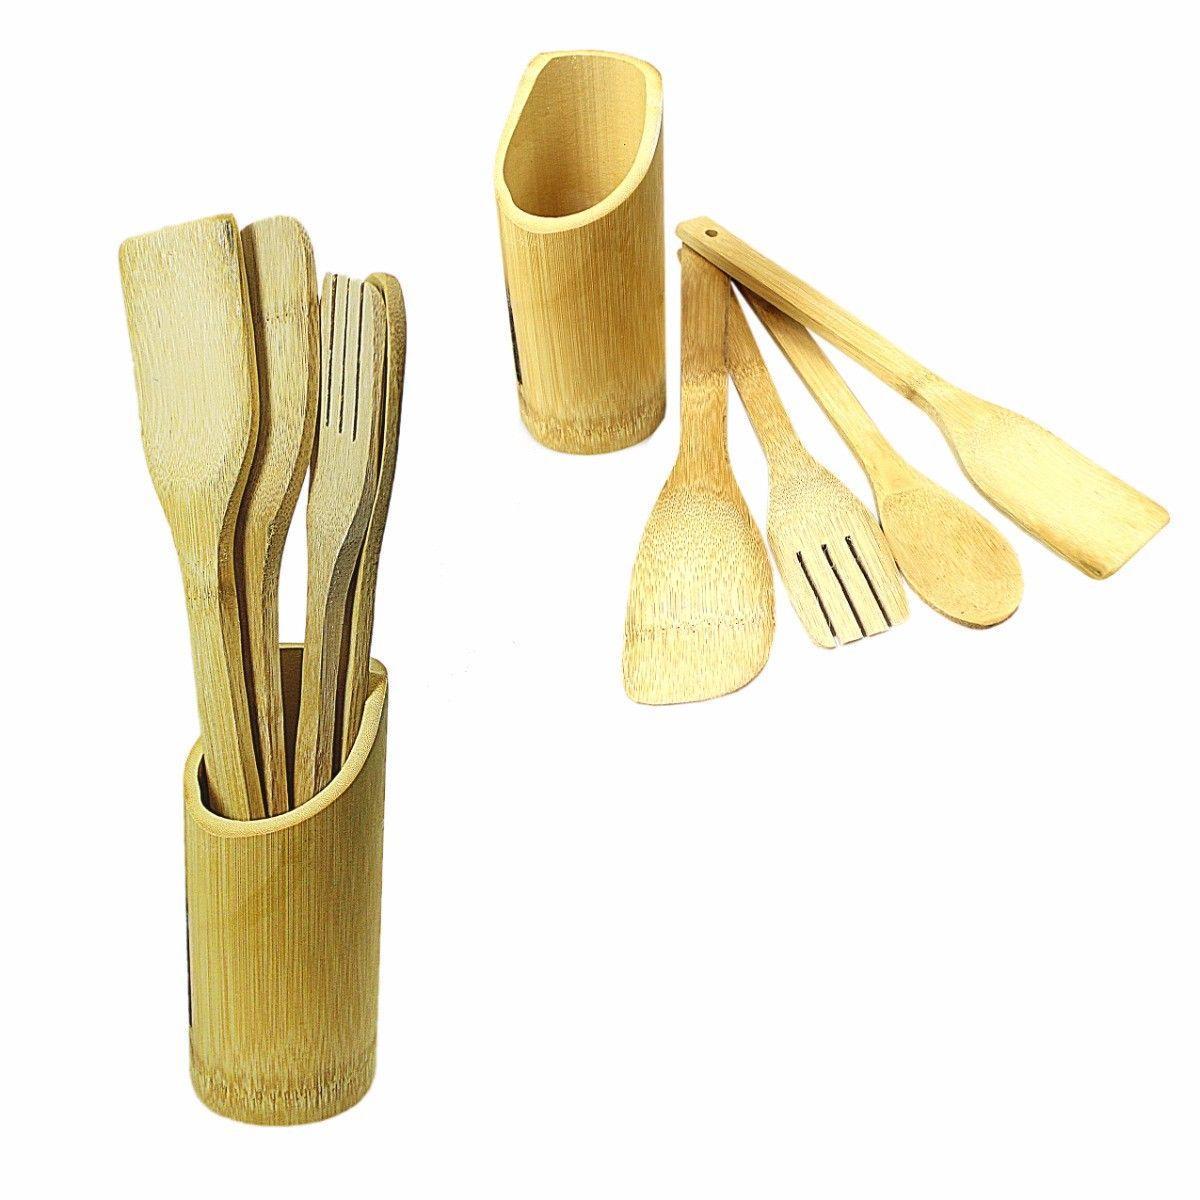 Bamboo Utensil Wooden Spoon Kitchen Set of 5 3827 / 4832 (Parcel Rate)